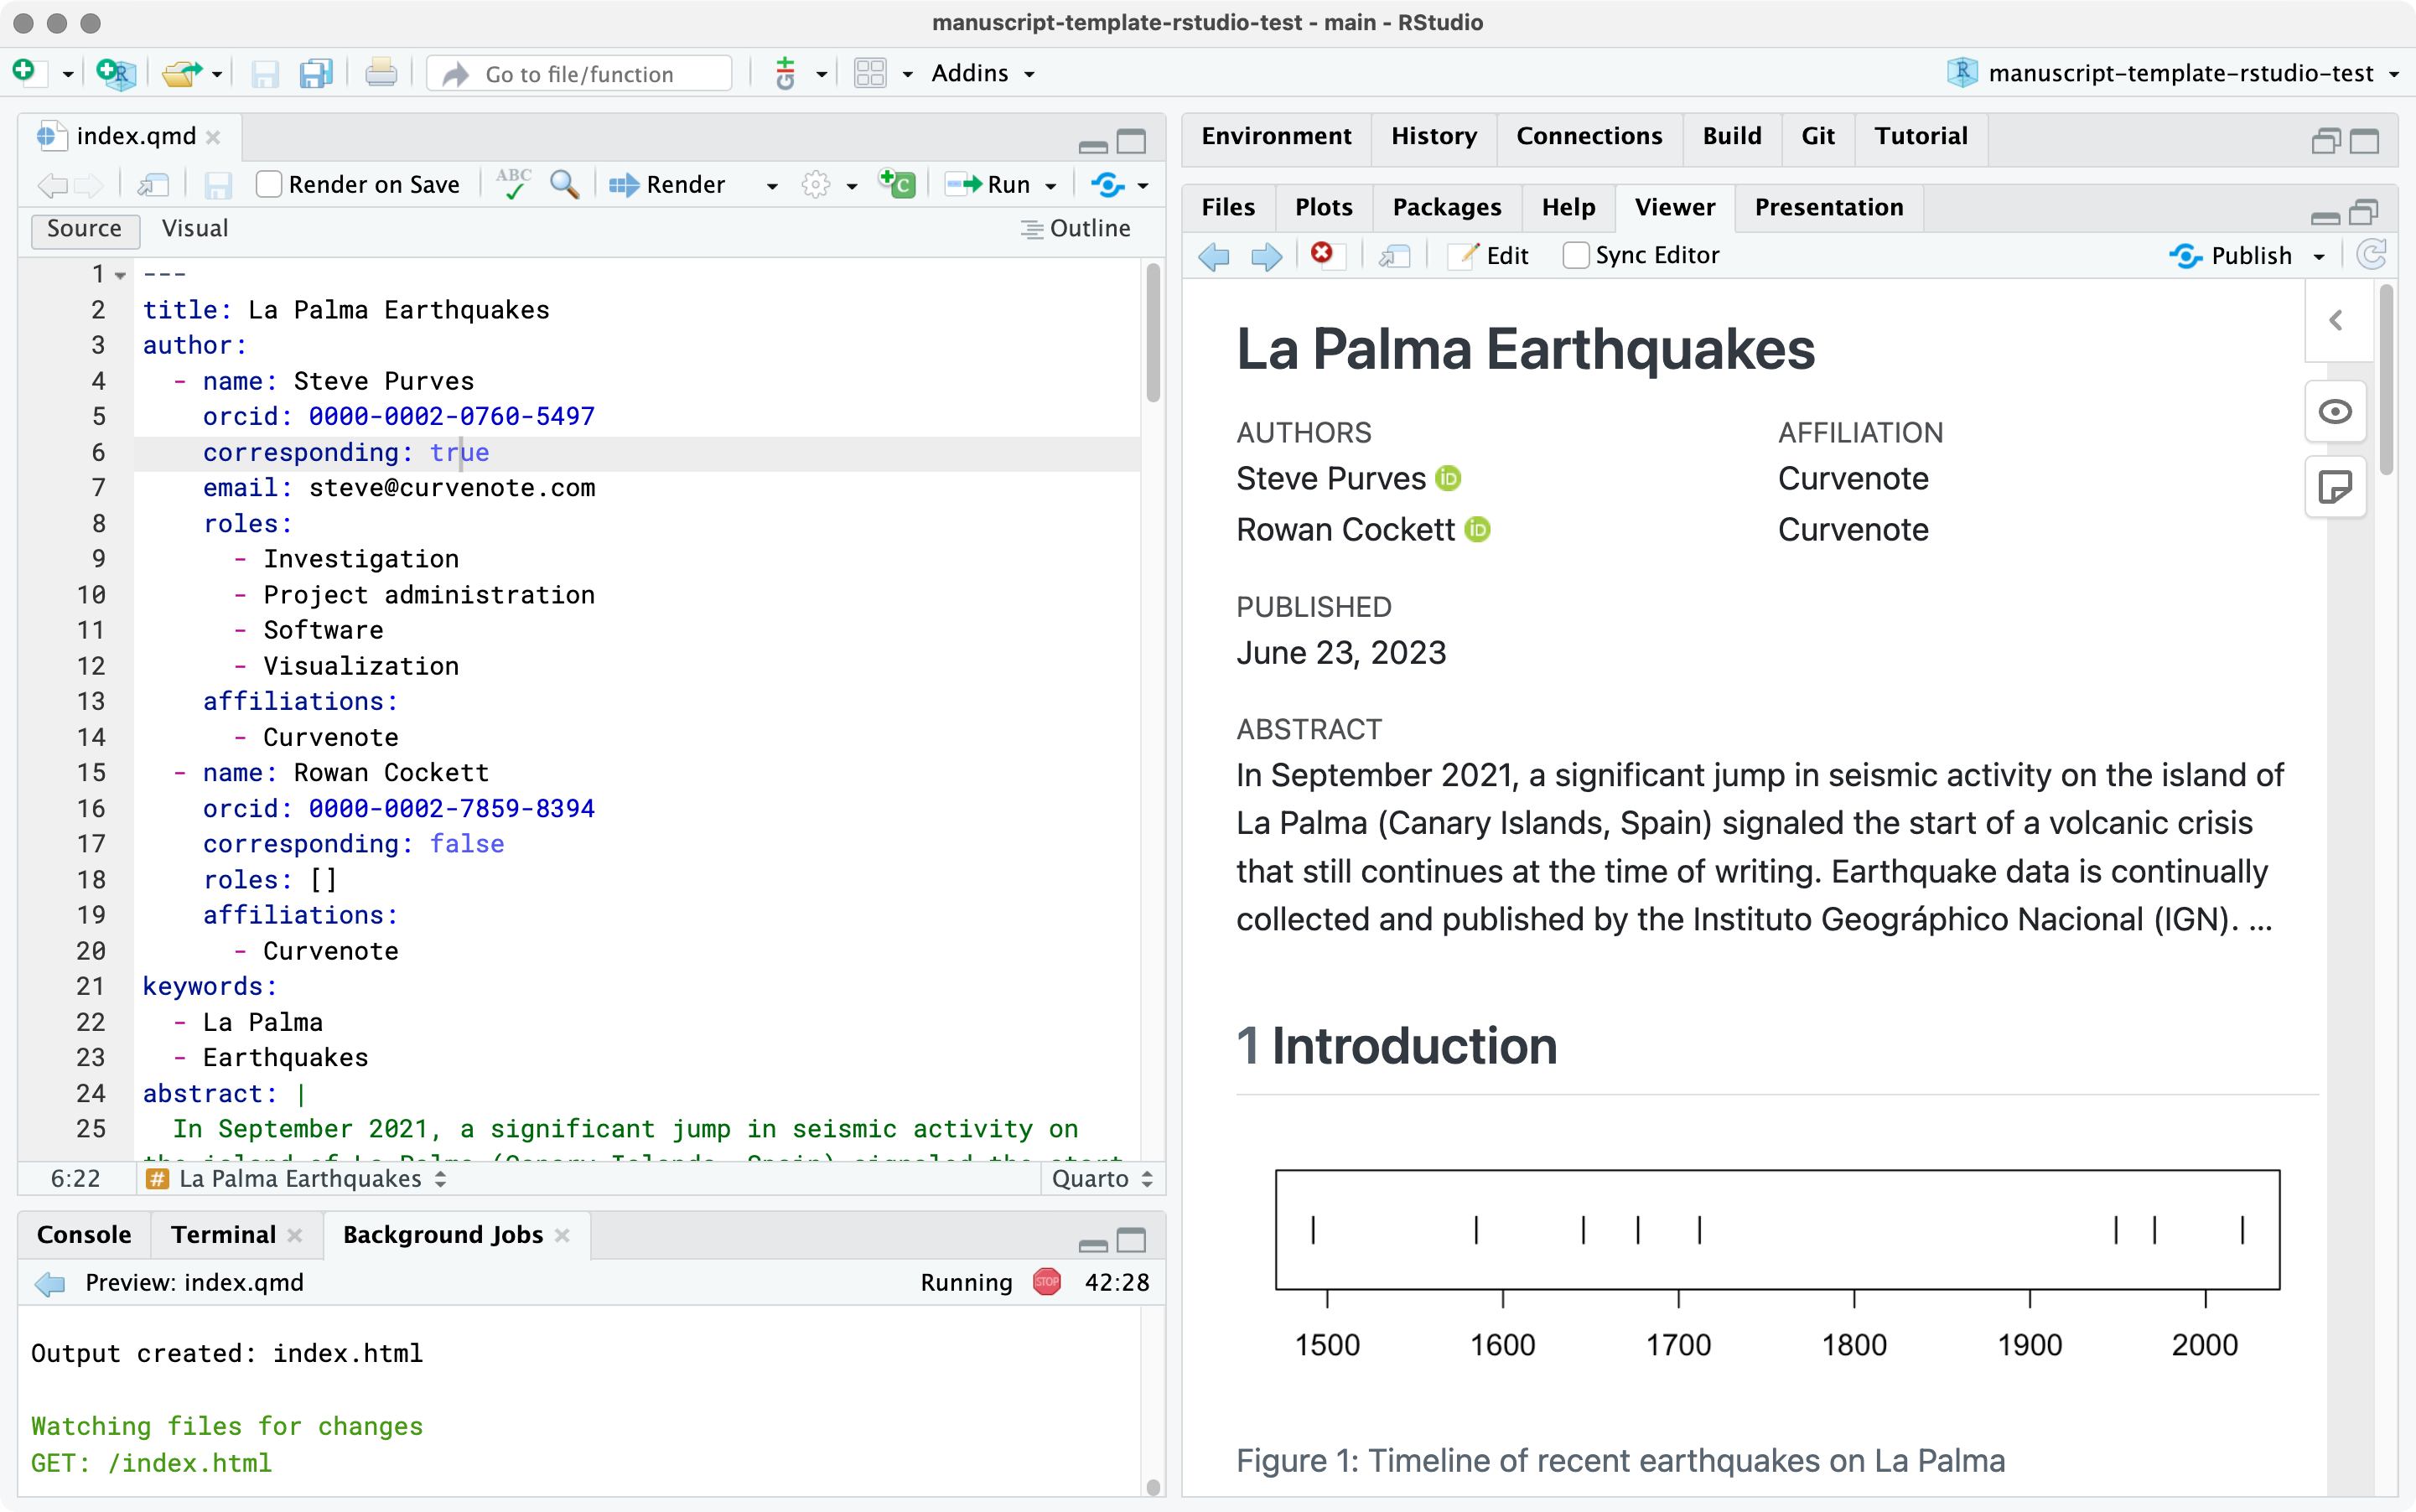 Screenshot of the RStudio IDE. Open in the Source pane is a file called index.qmd. In the Viewer pane, a website starting with the header La Palma Earthquakes.